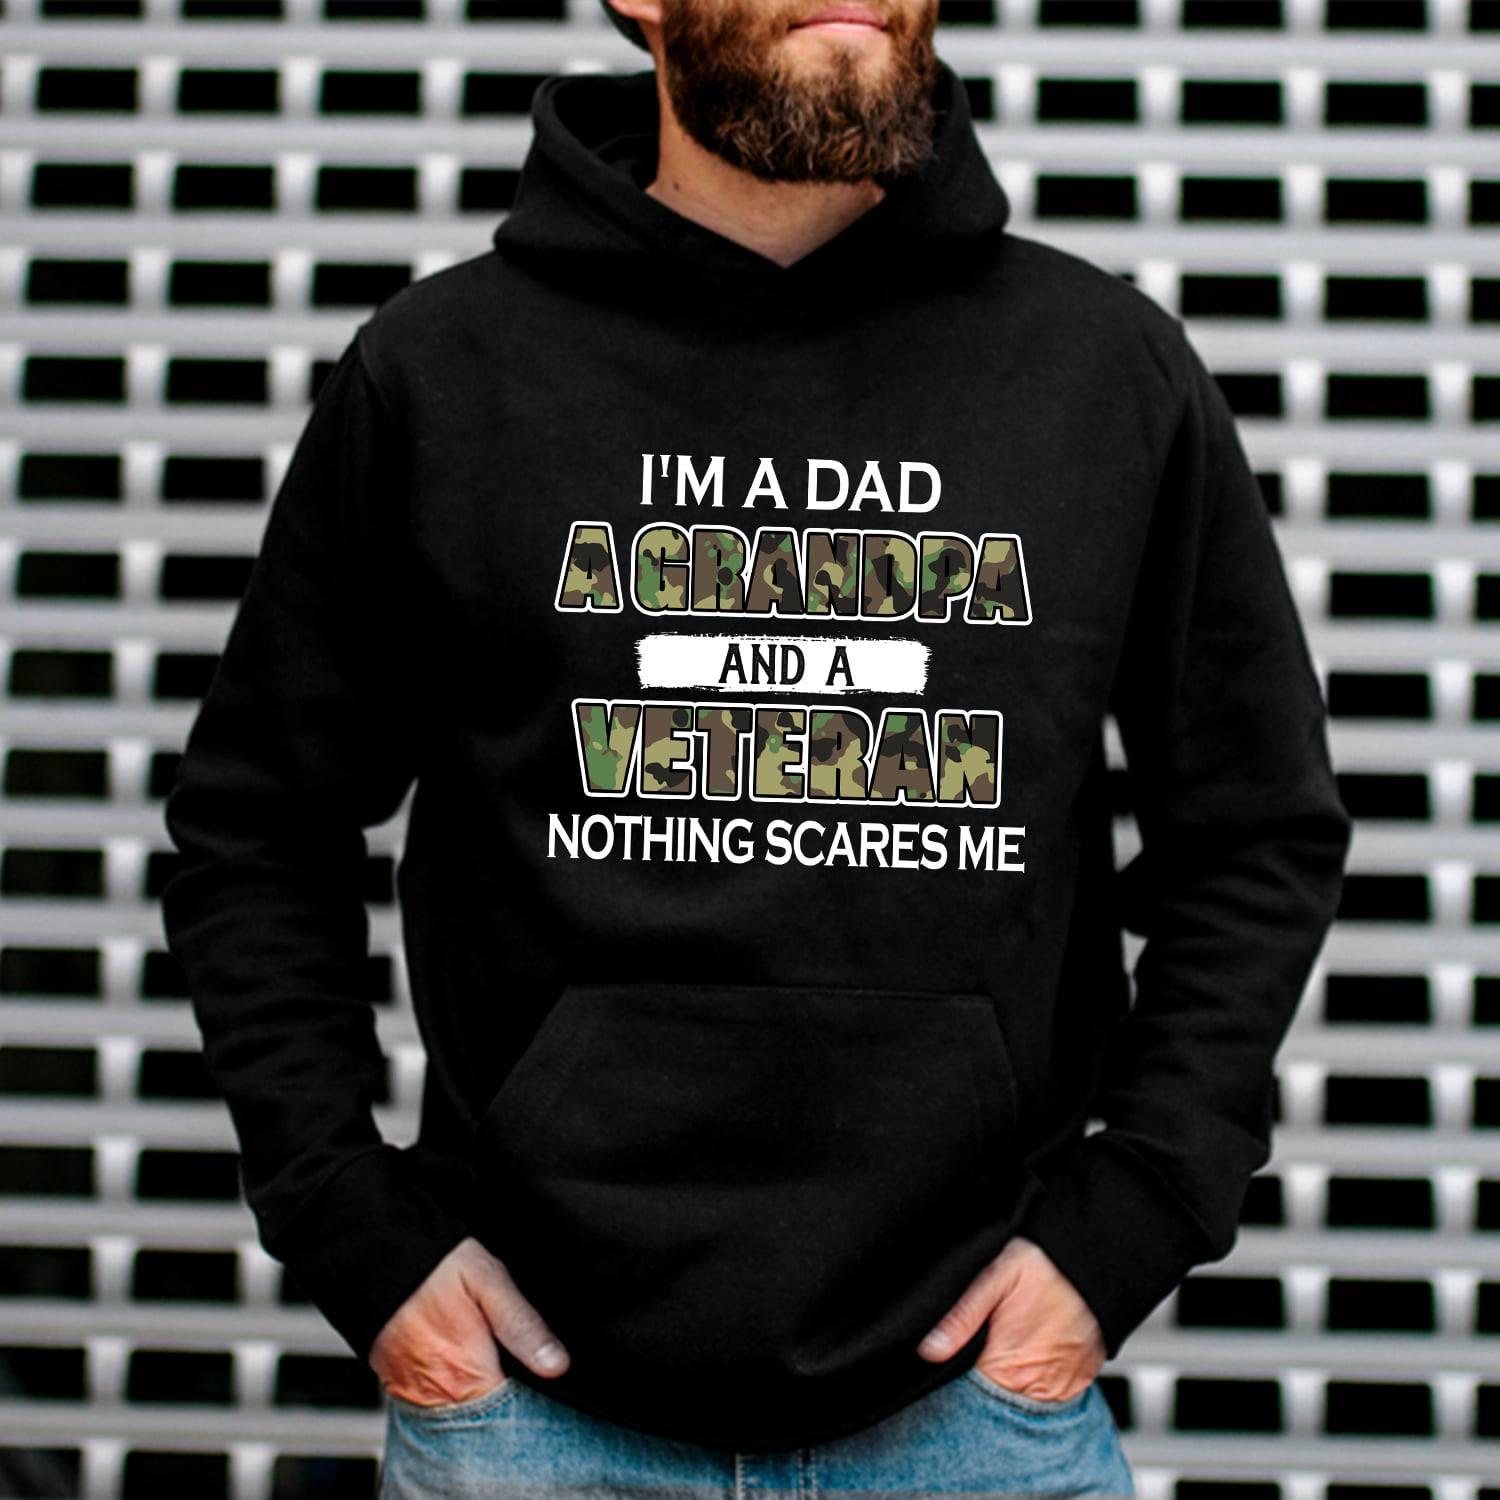 I'm a dad a grandpa and a veteran nothing scares me - Grandpa the veterans, father's day gift